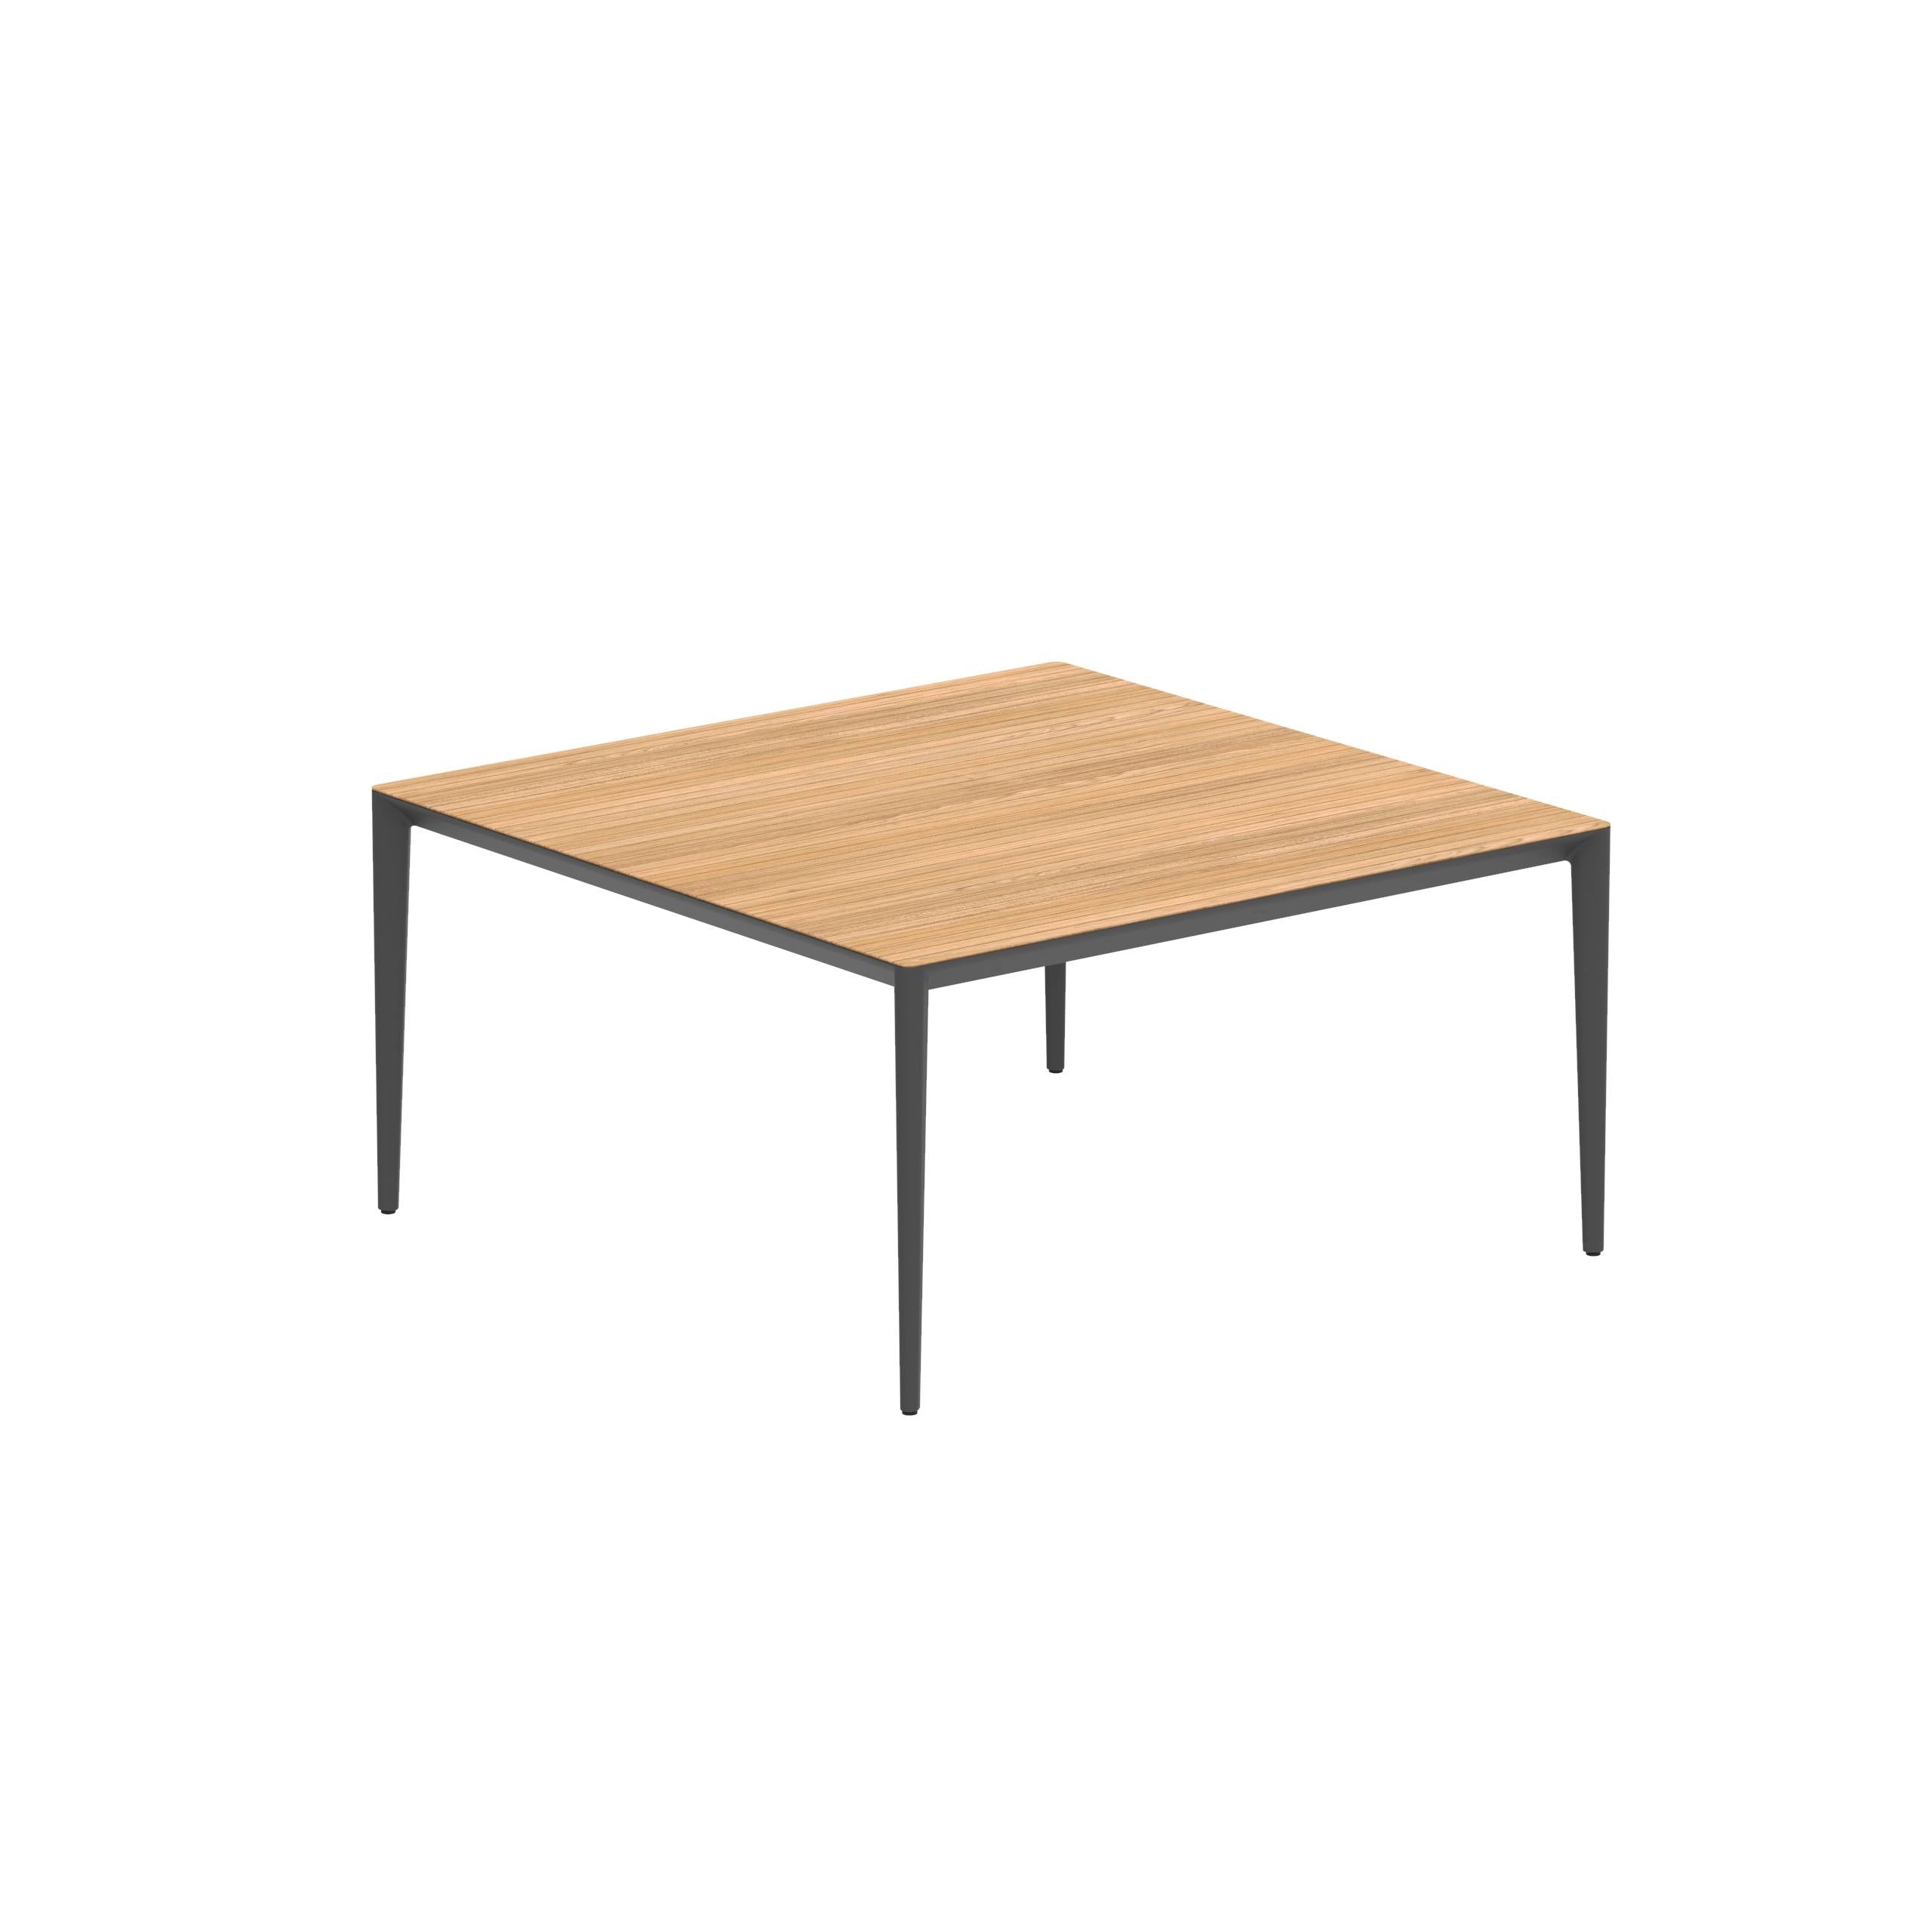 U-Nite Table 150x150cm Anthracite With Tabletop In Teak